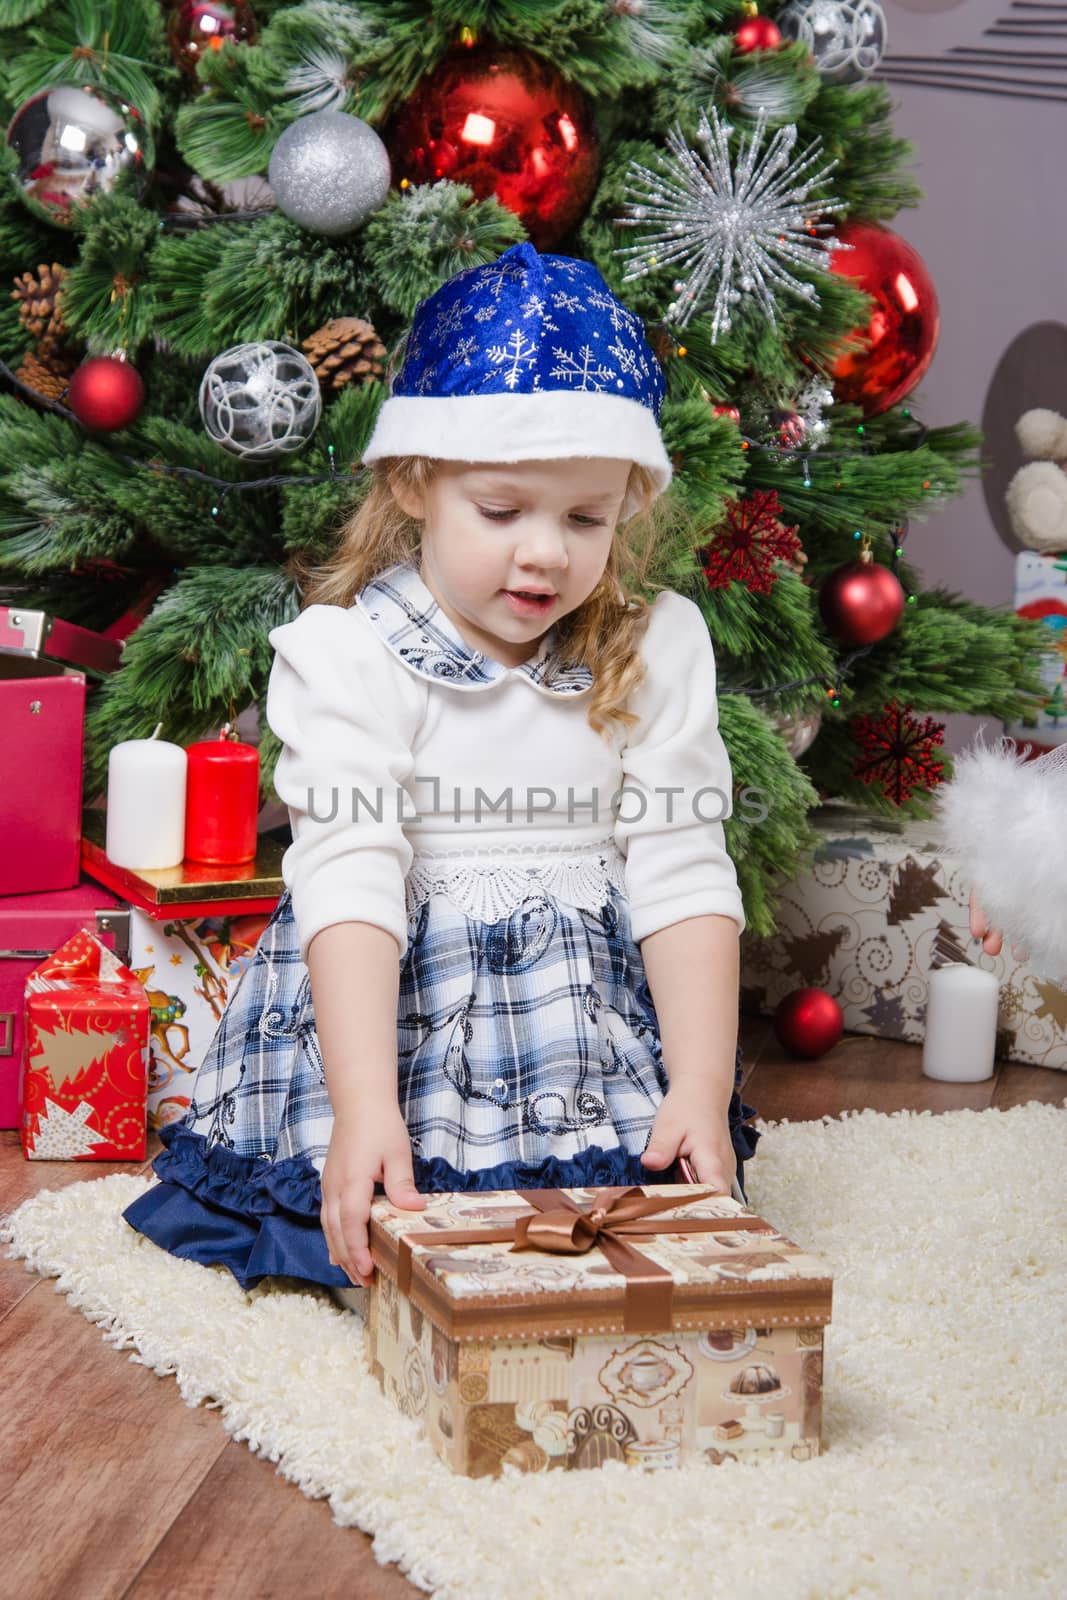 Little girl with a gift in Christmas tree by Madhourse